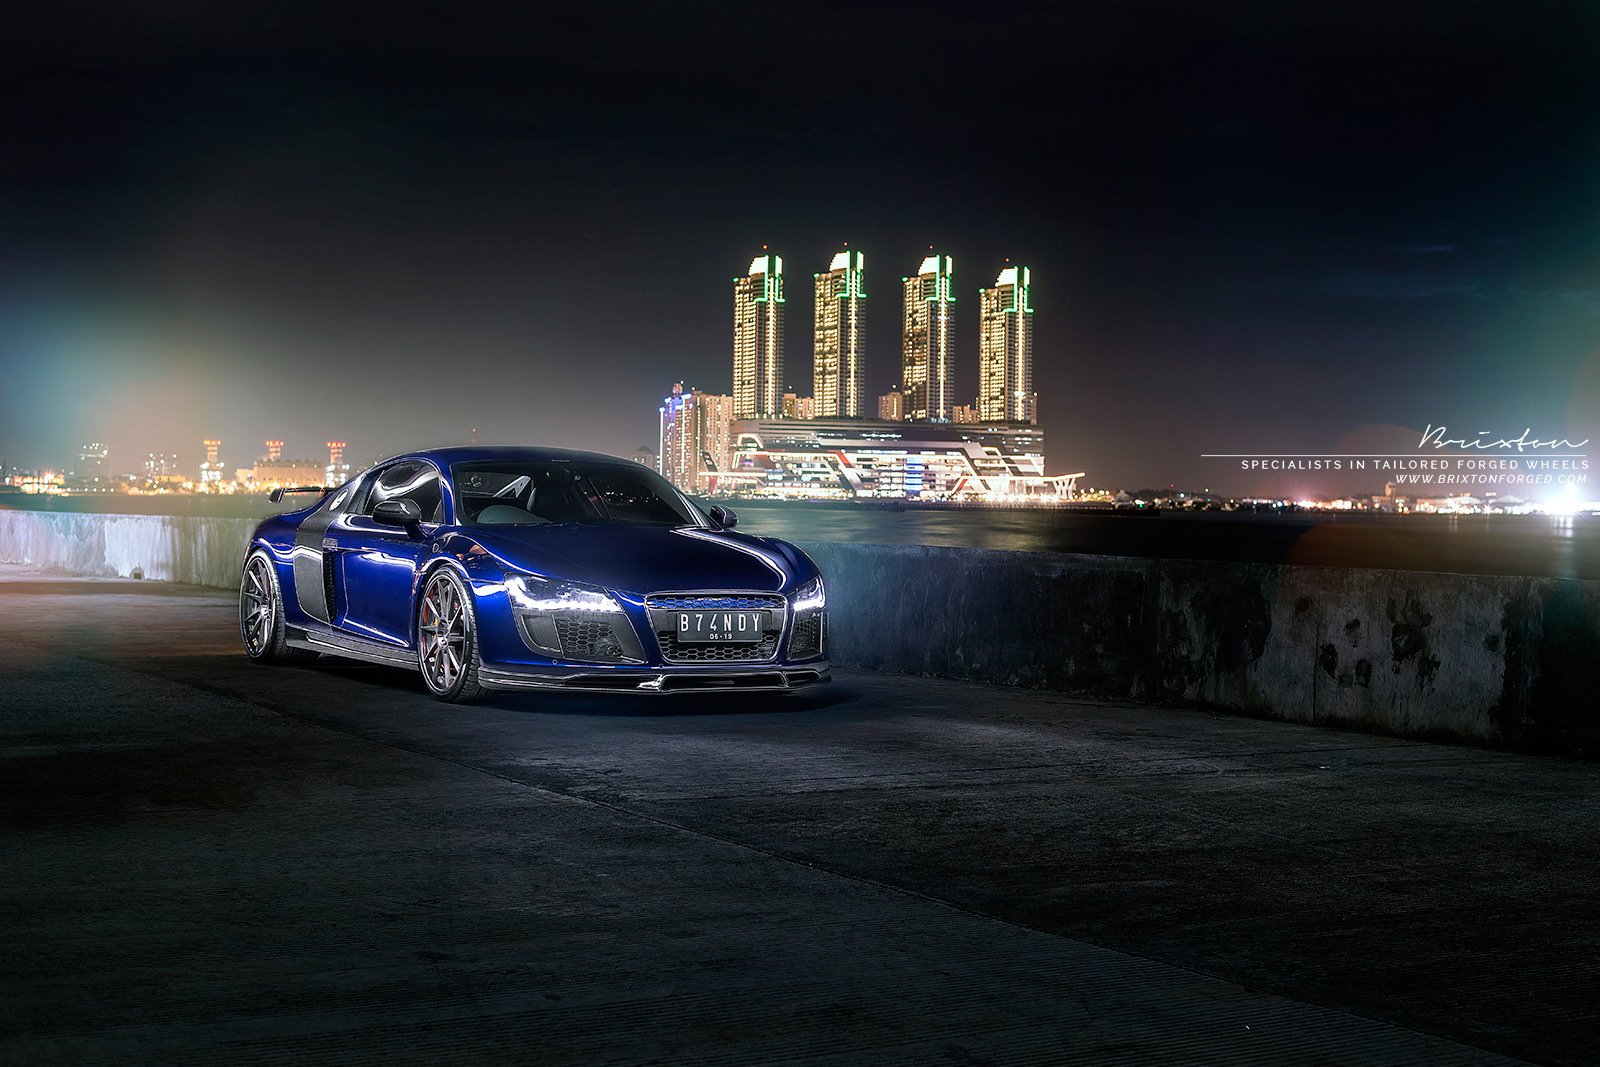 brixton, Forged, Wheels, Audi r8, Coupe, Cars Wallpapers HD / Desktop ...